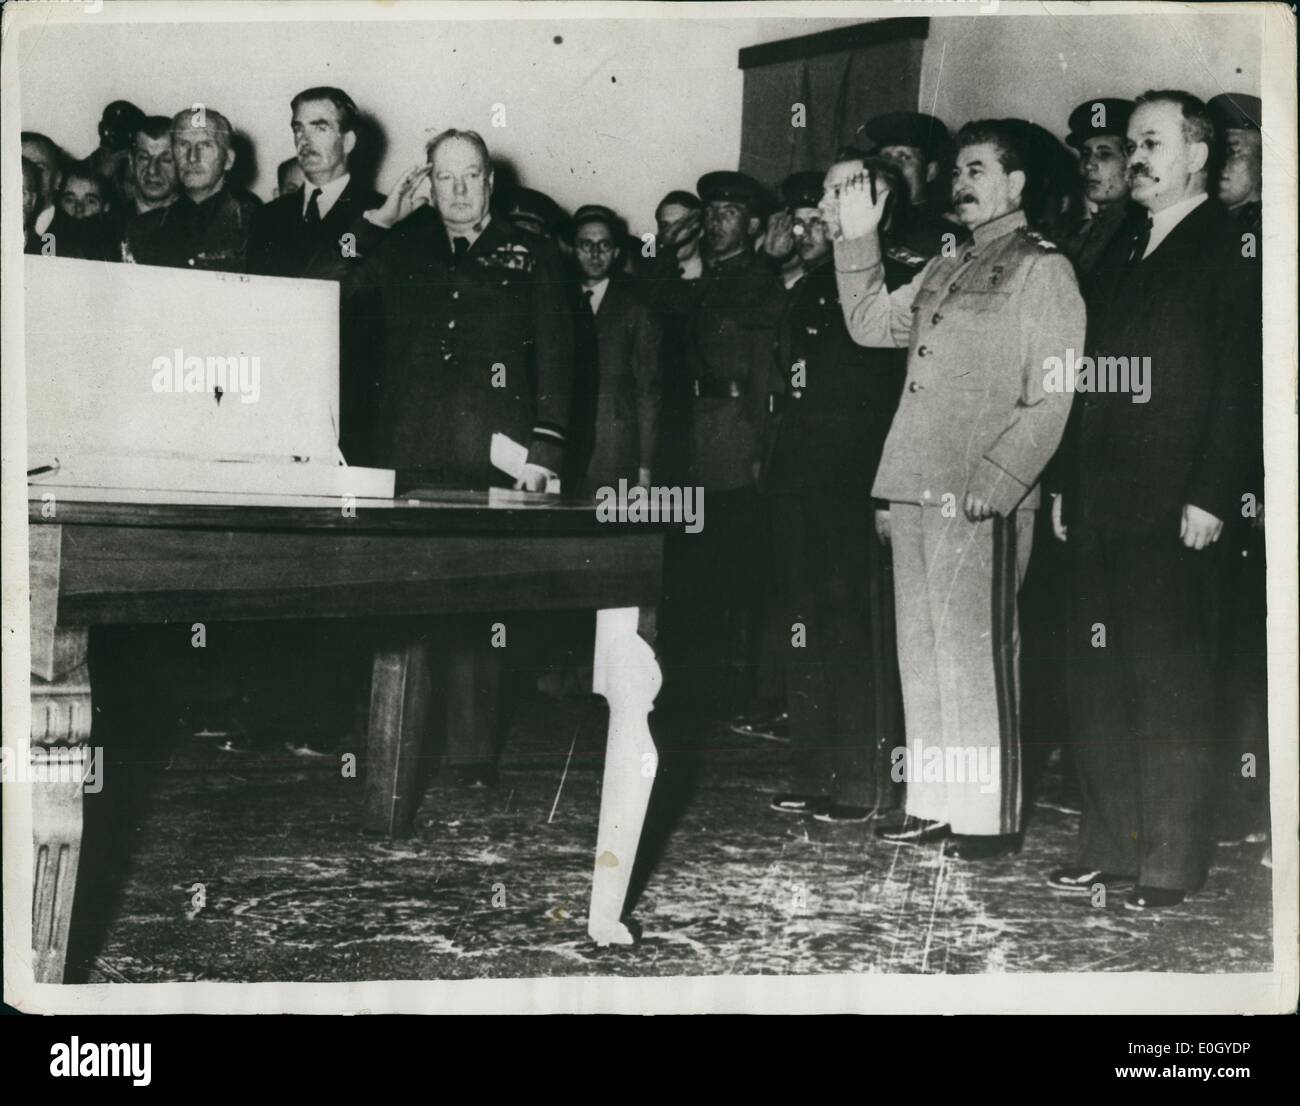 Jan 1, 1940 - Stalingrad sword - presentation Teheran conference.: Prime Minister Winston Churchill in salute during playing of Stock Photo